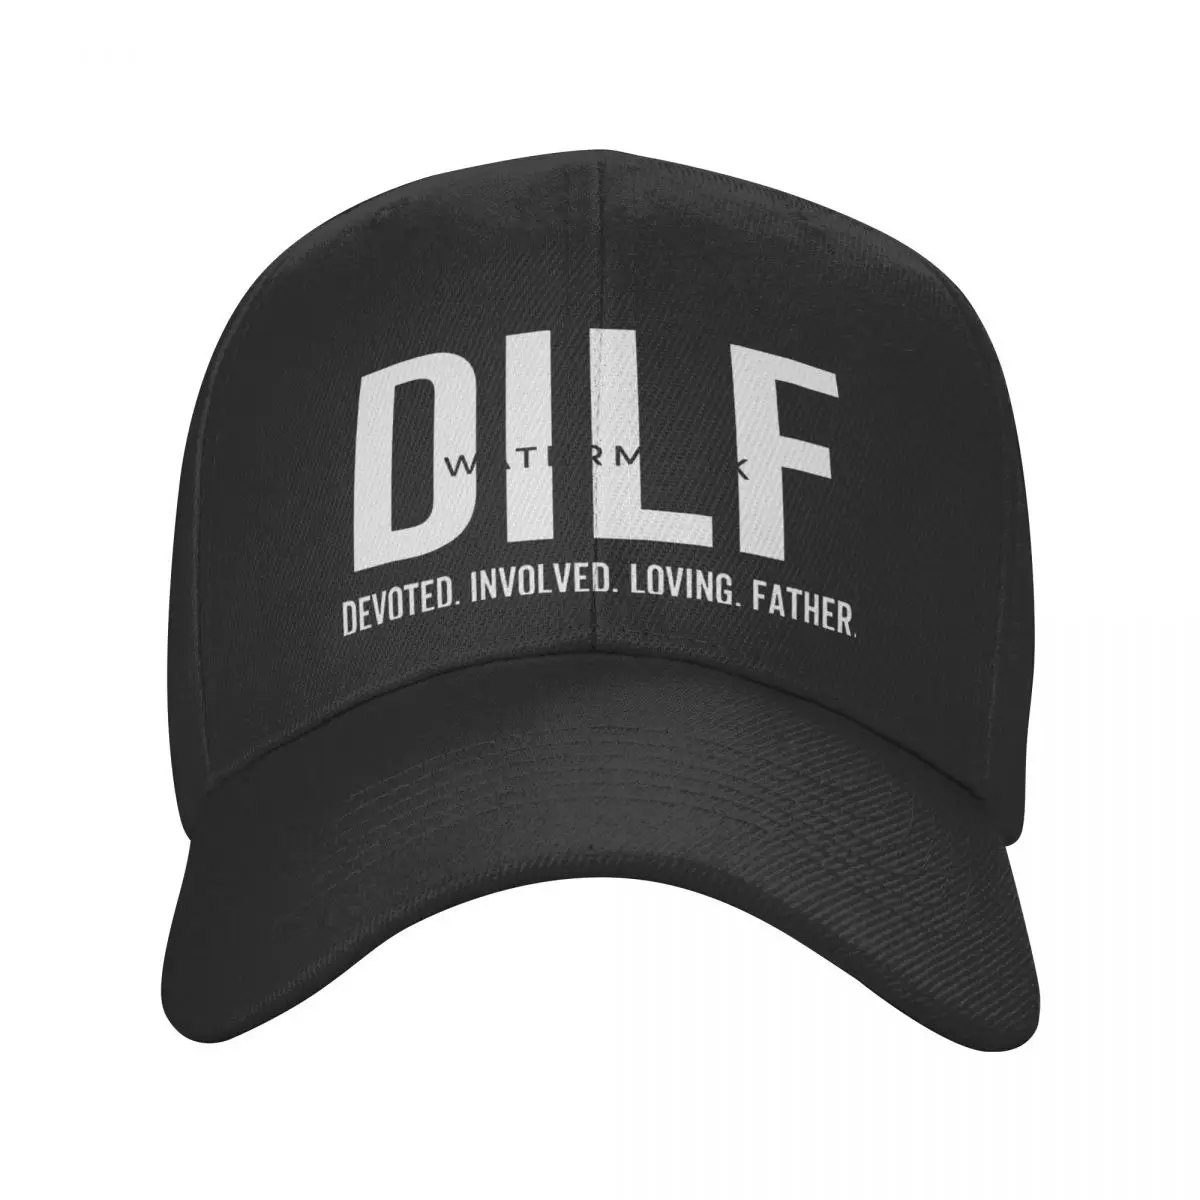 

DILF Devoted Involved Loving Father Casquette, Polyester Cap Personalized Practical Sports Nice Gift